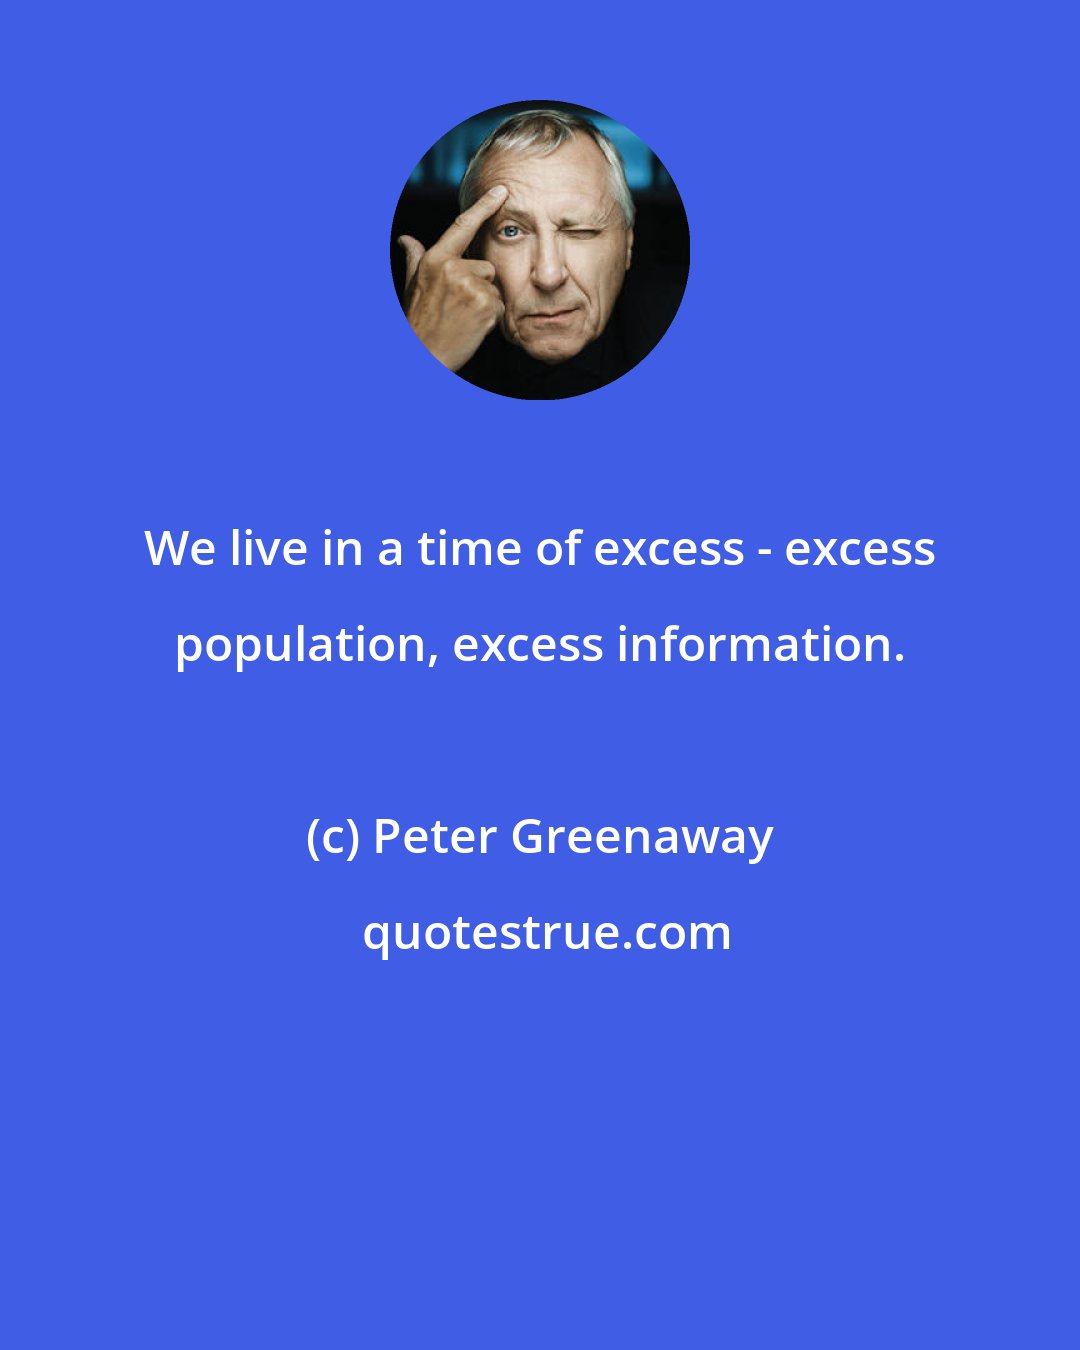 Peter Greenaway: We live in a time of excess - excess population, excess information.